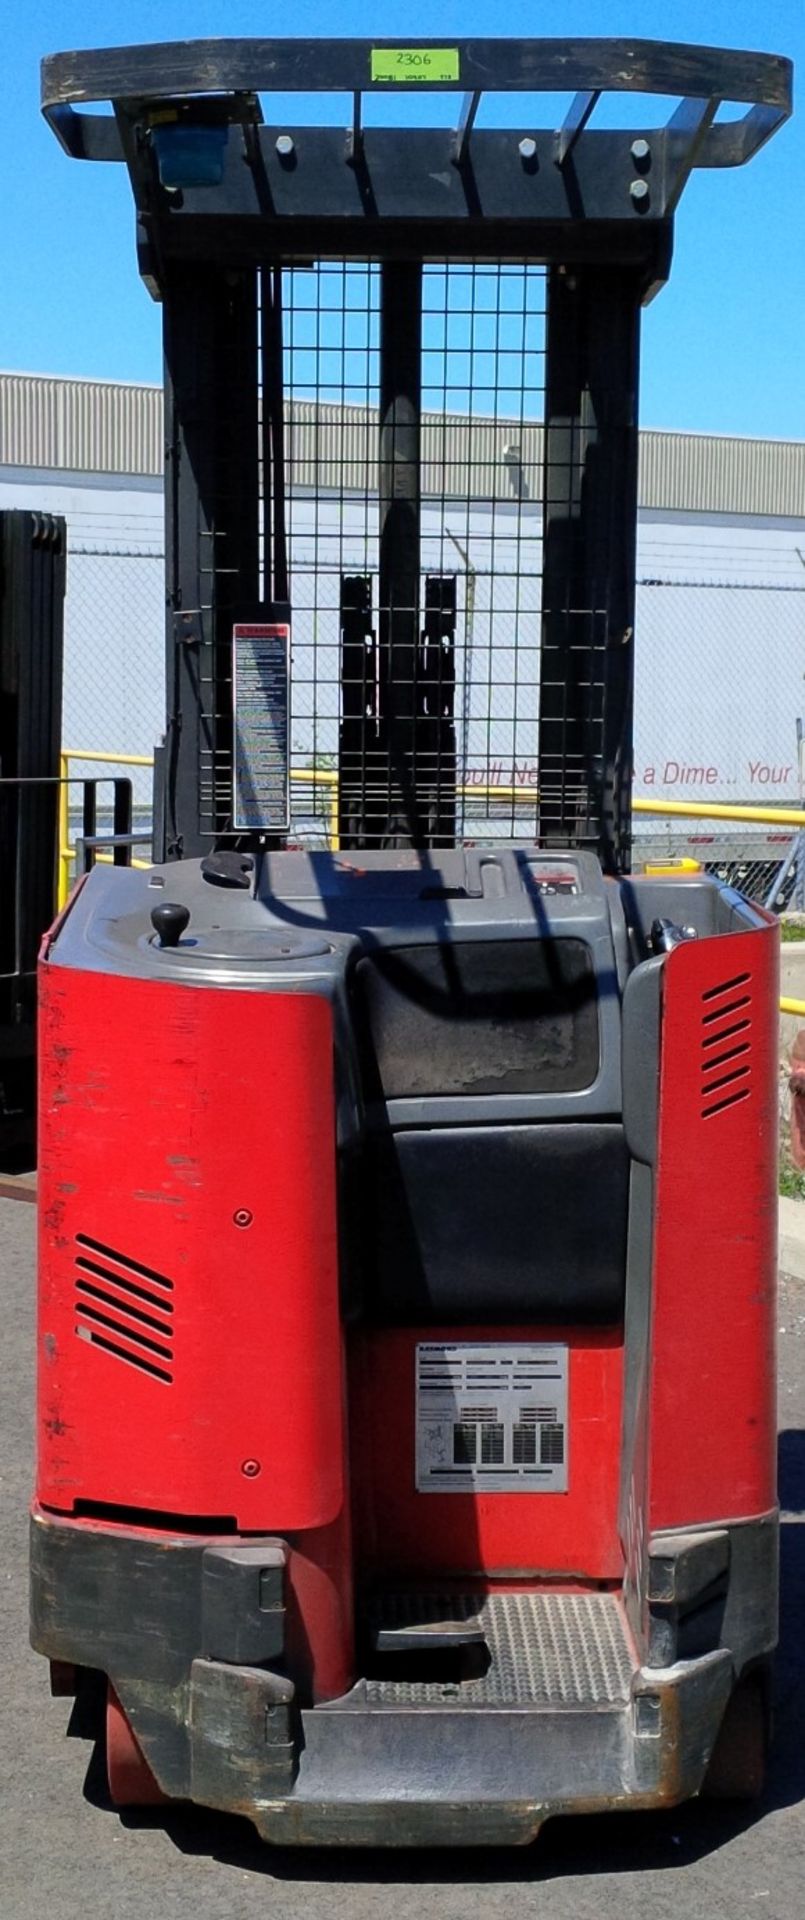 RAYMOND (2004) EZ-R40TT 36V ELECTRIC REACH TRUCK WITH 4000 LB. CAPACITY, 211" VERTICAL LIFT, S/N: - Image 2 of 2